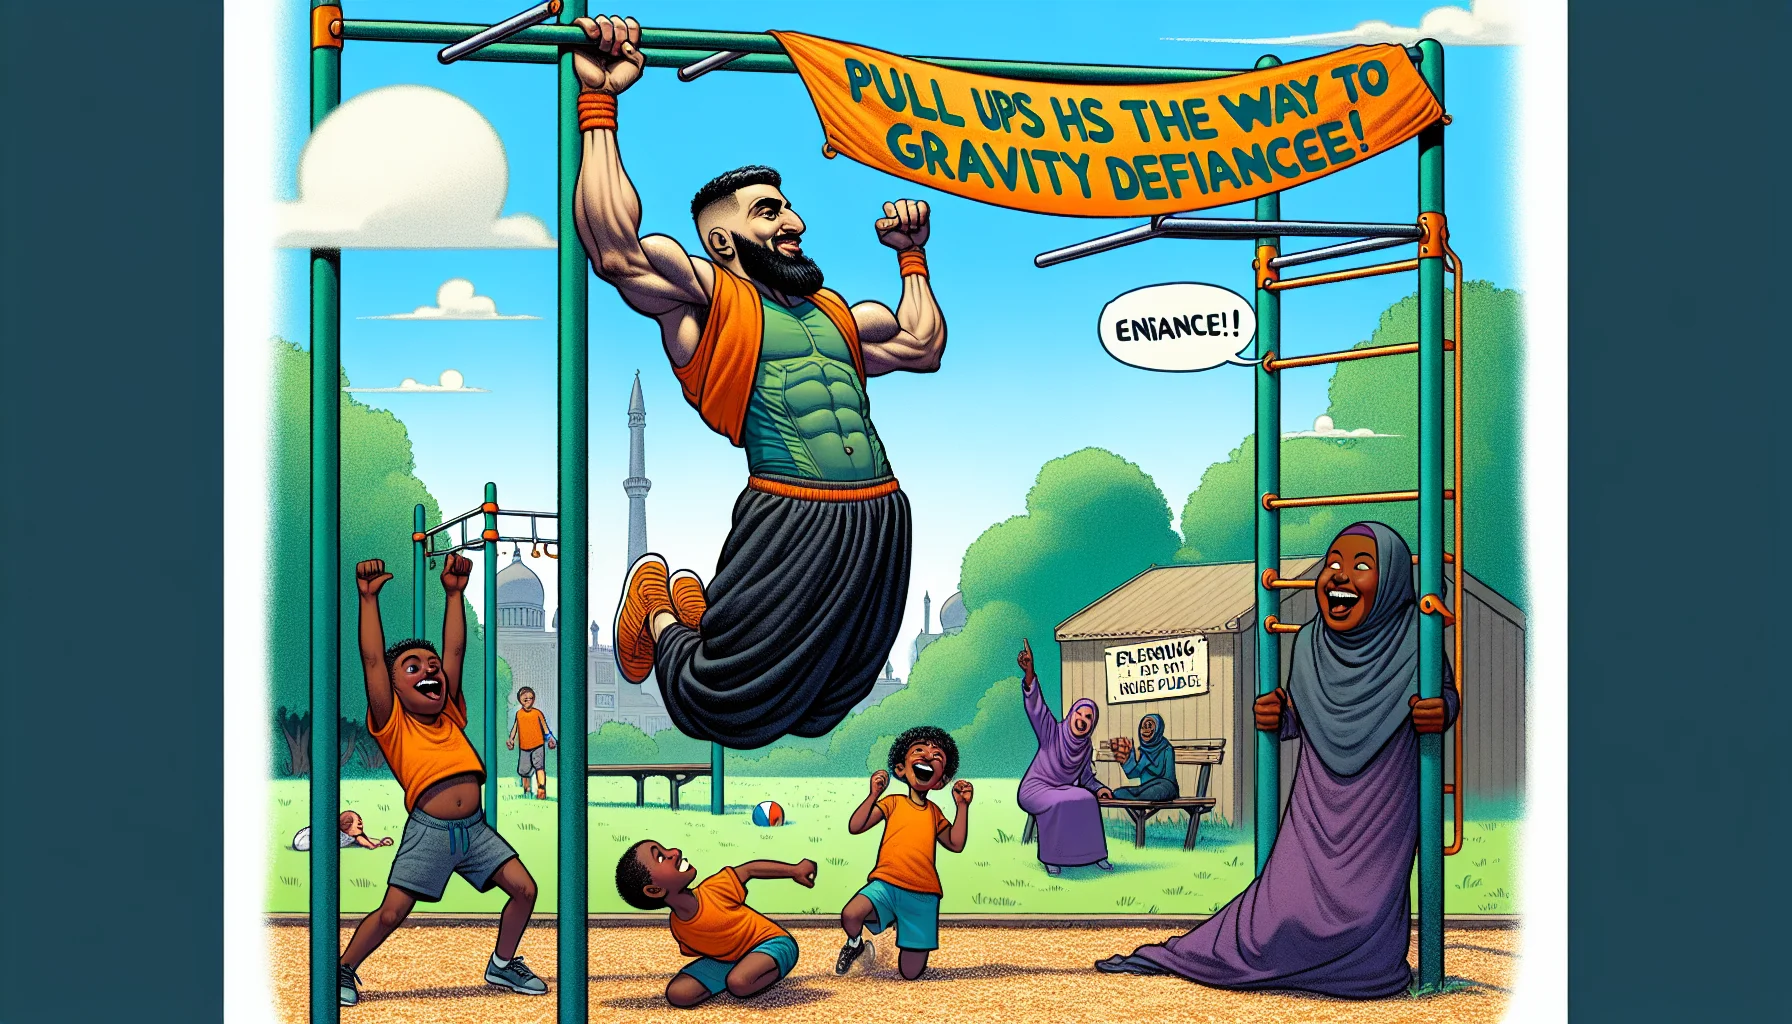 Imagine an amusing scene unfolding in an outdoor park during summer. A Middle Eastern man is performing a calisthenics pull-day workout, elegantly swinging on the monkey bars. He unfurls a banner behind him that humorously declares, 'Pull ups are the way to gravity defiance!'. Nearby, a black woman is laughing heartily while encouraging her kids to imitate him. She is shouting playful words of encouragement that adds to the levity of the scene. The children are excited and trying their best to mimic the man's movements, creating an enticing and funny environment that motivates everybody present to exercise.